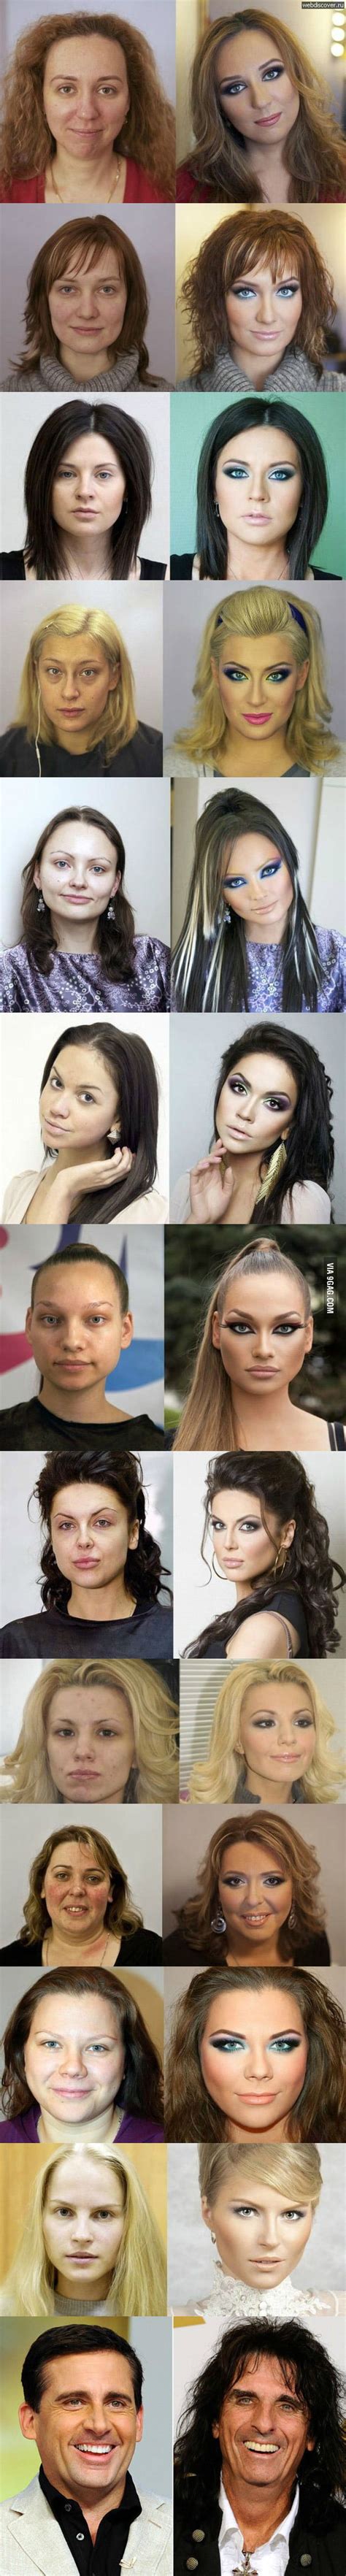 Stripper Transformation Before And After 9gag